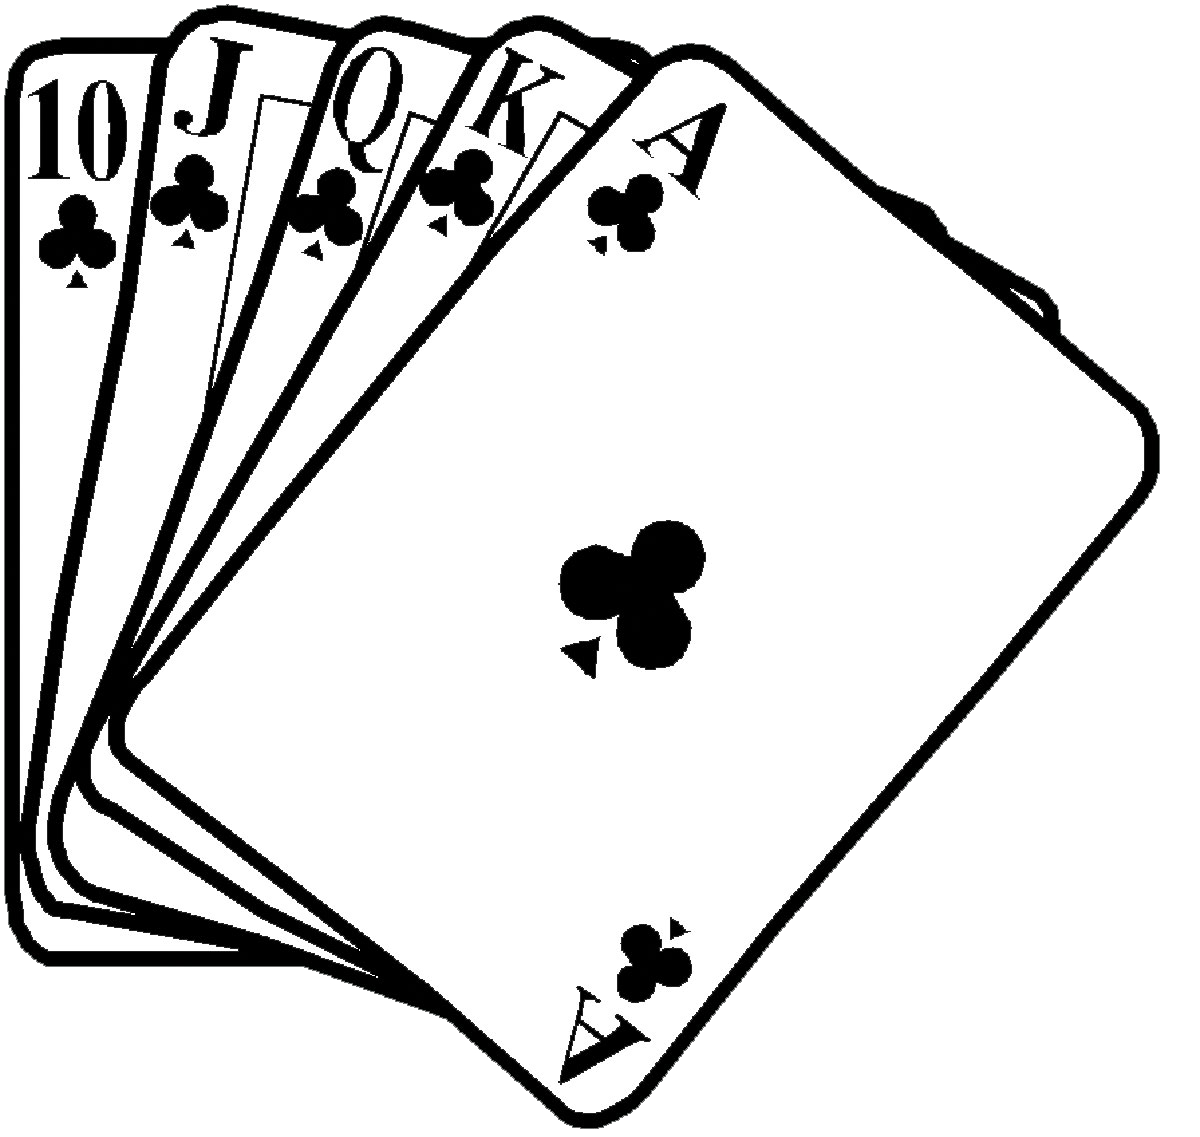 Free Poker Hand Images, Download Free Poker Hand Images png images ...